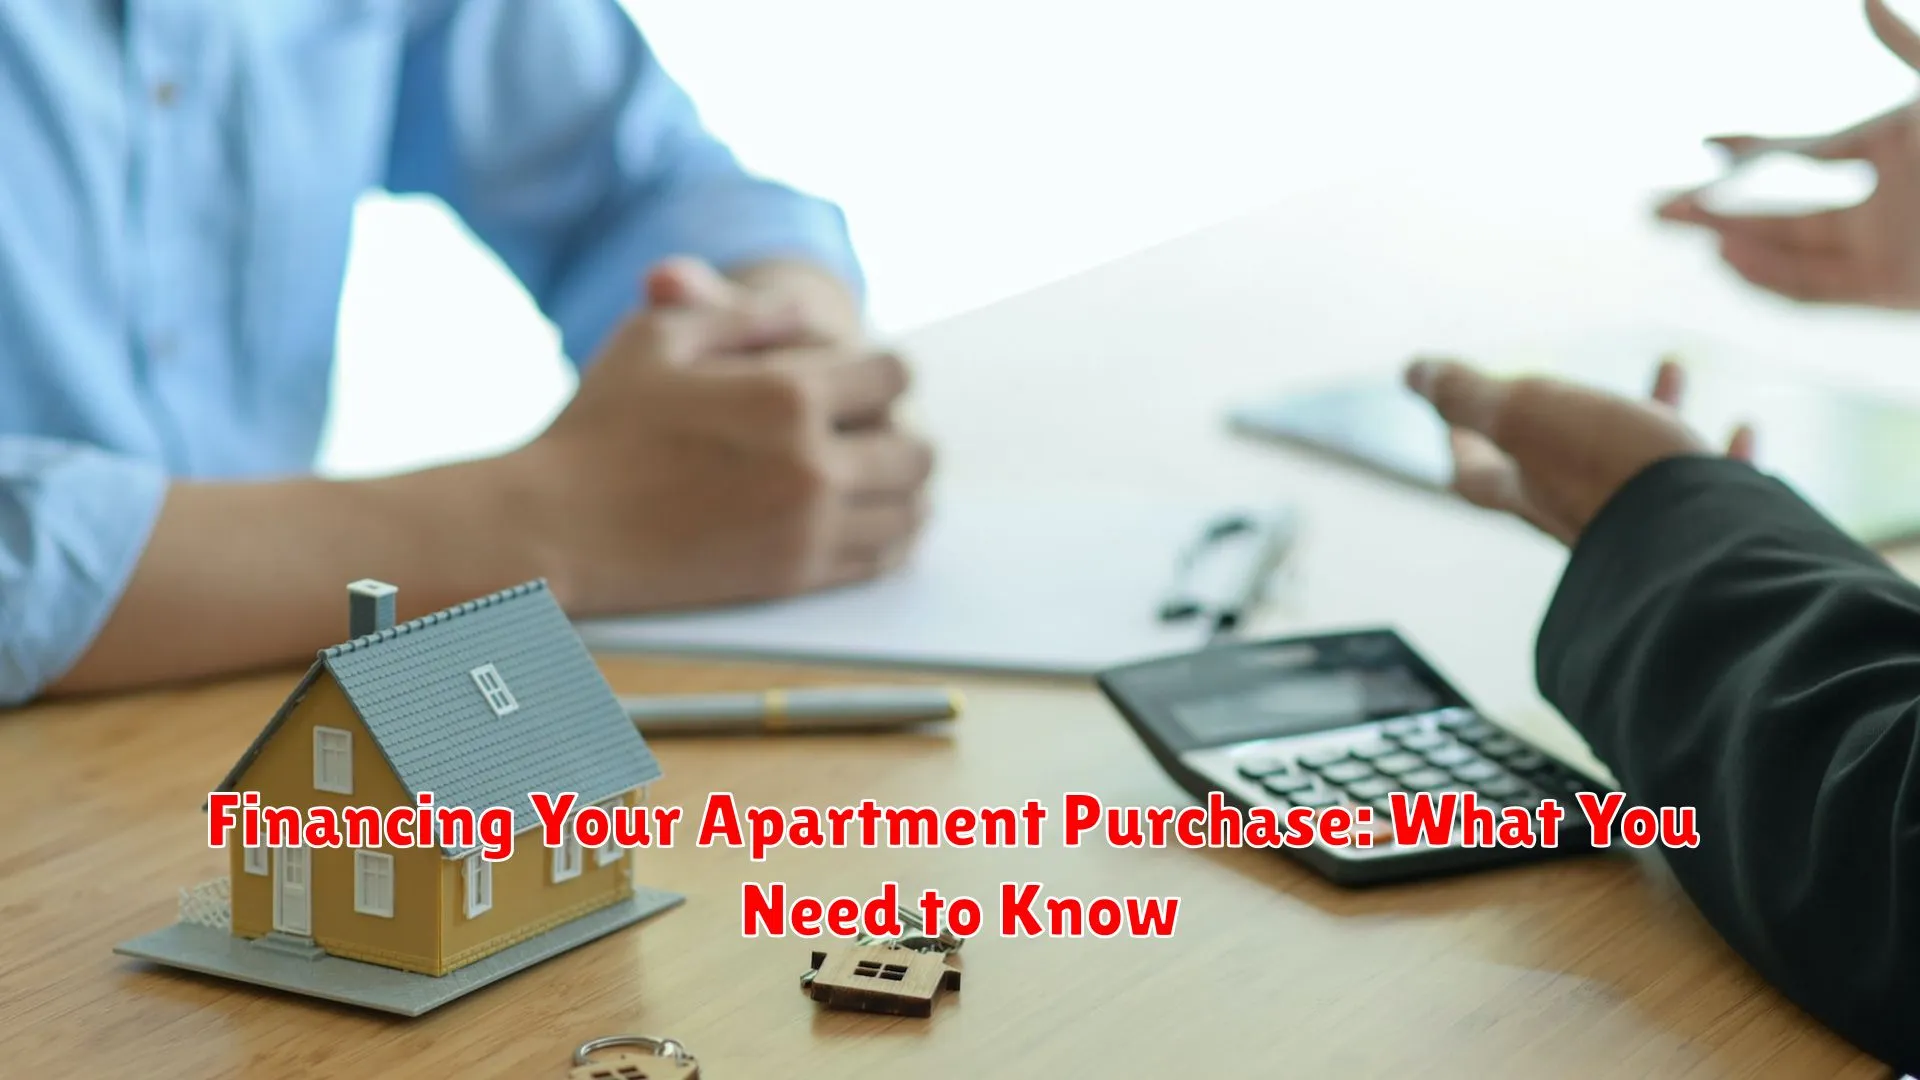 Financing Your Apartment Purchase: What You Need to Know